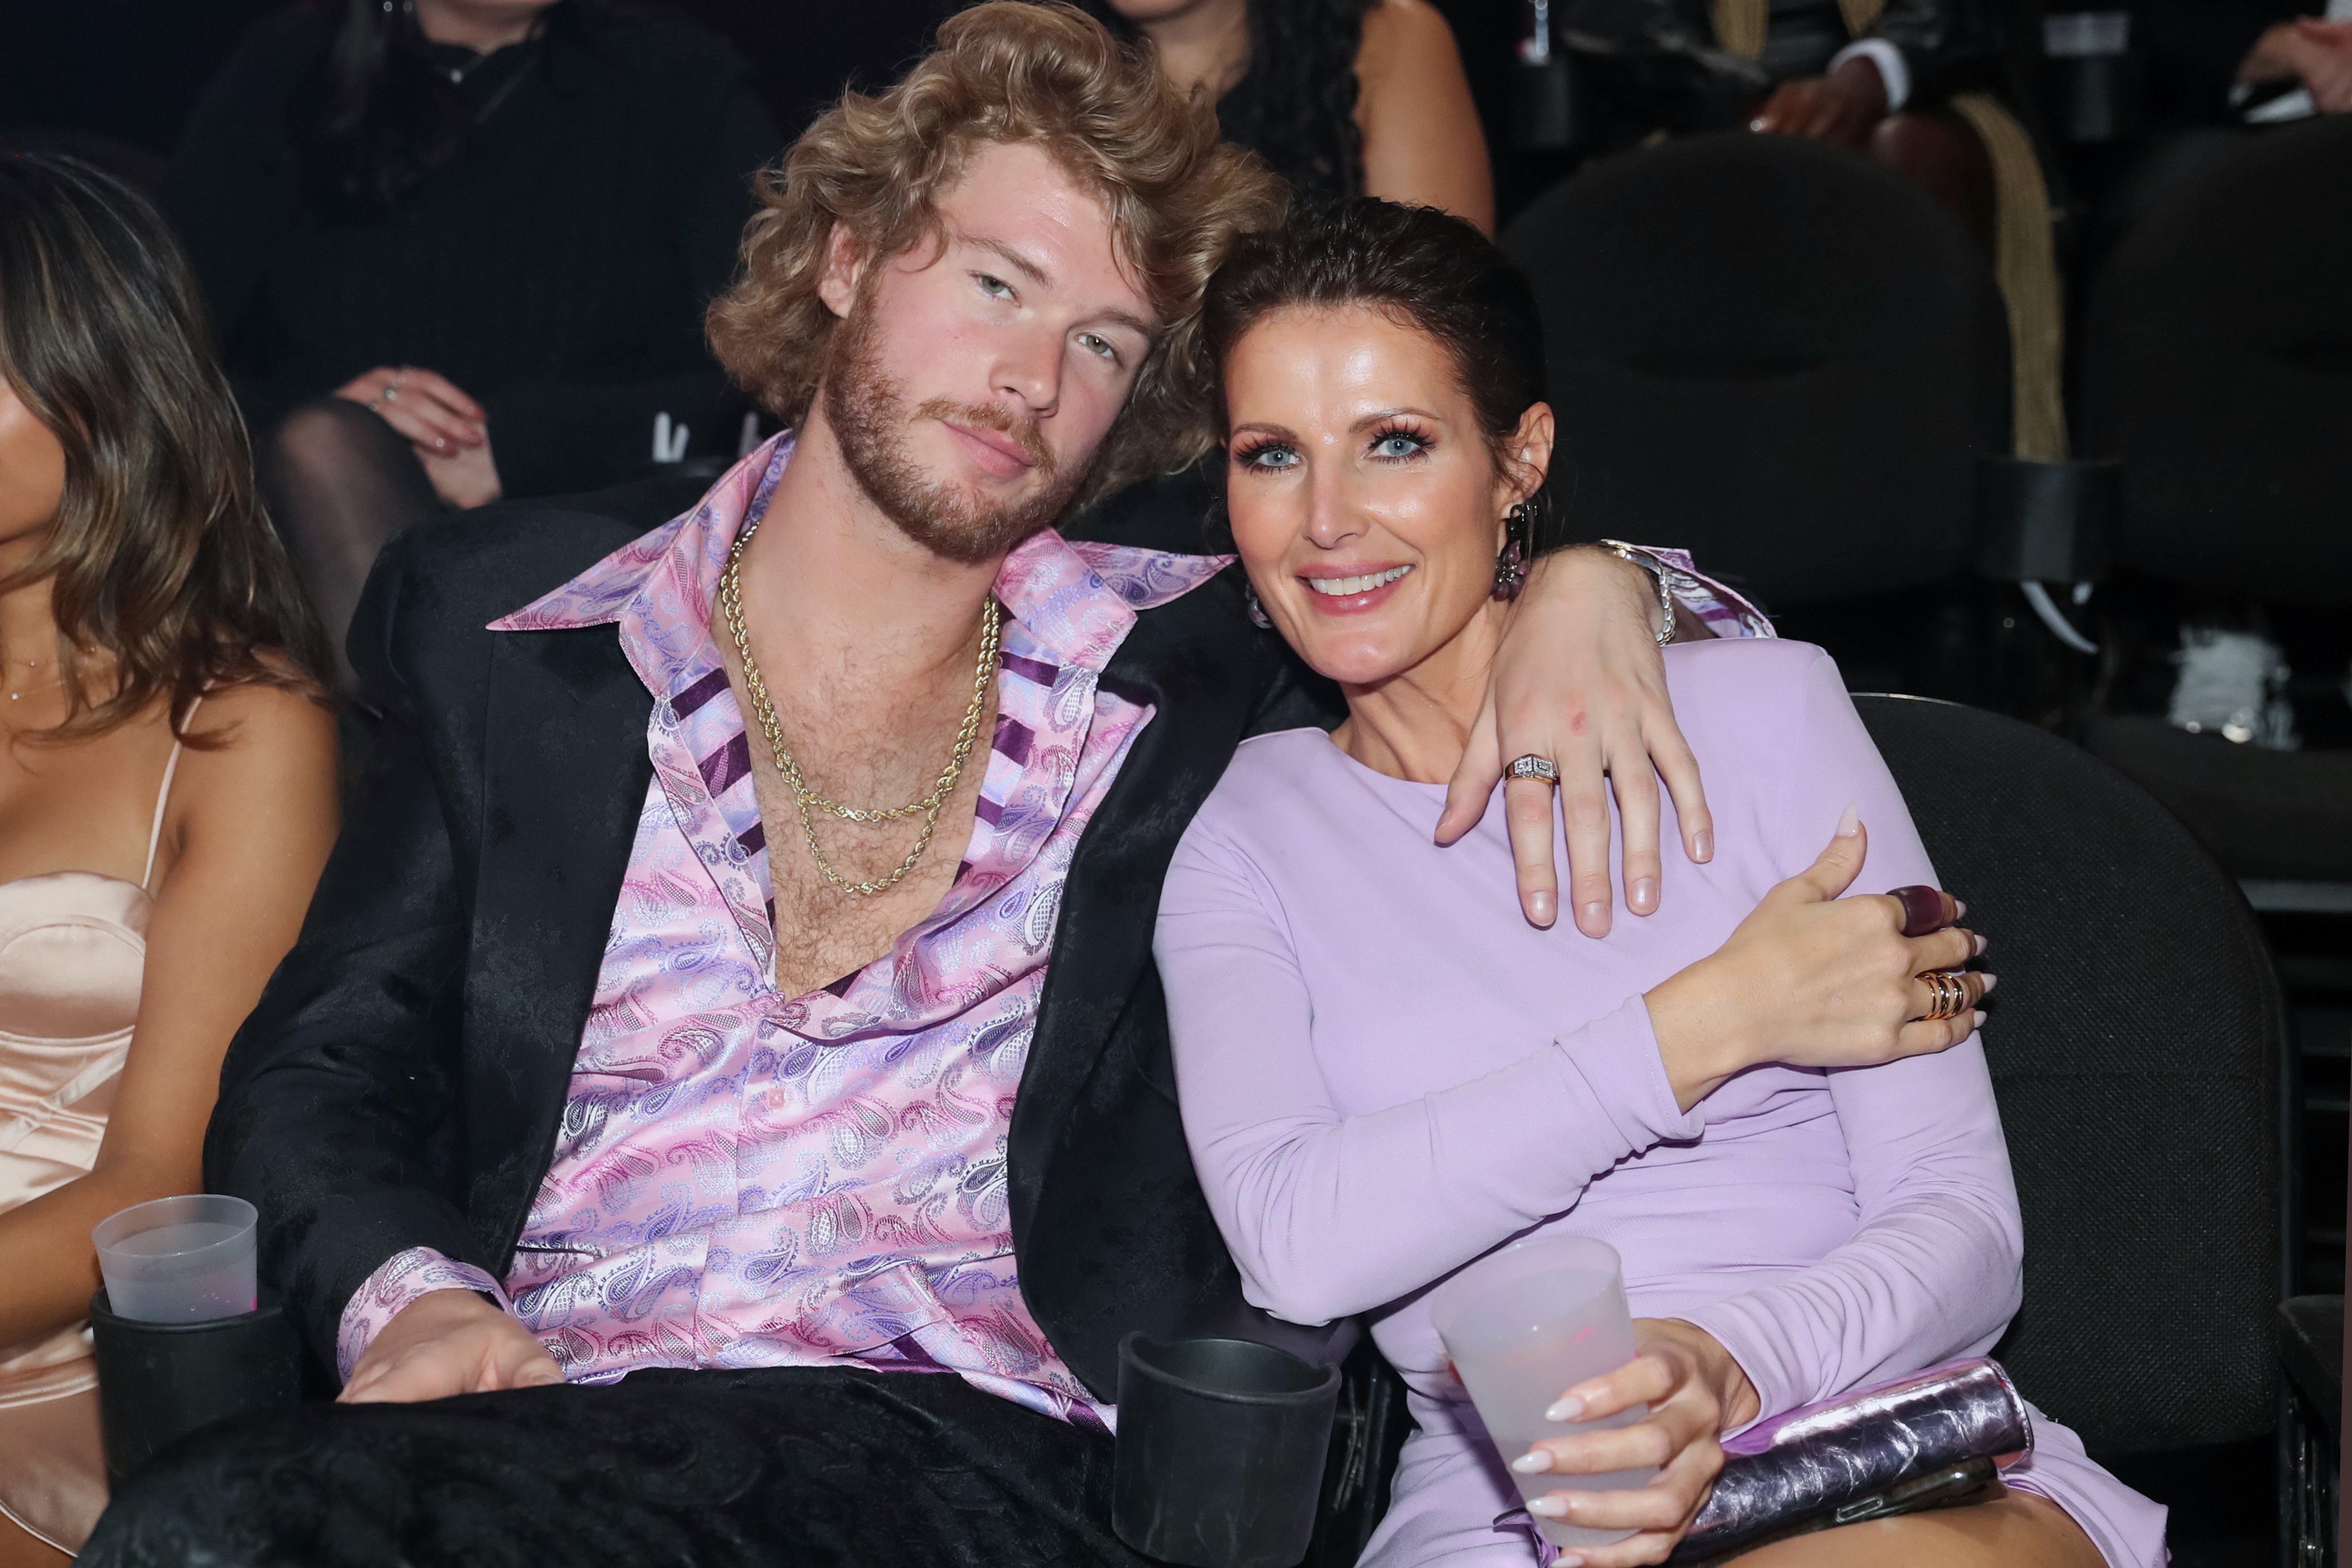 Yung Gravy and Sheri Nicole Easterling during the 2022 MTV VMAs at Prudential Center on August 28, 2022 in Newark, New Jersey. | Source: Getty Images